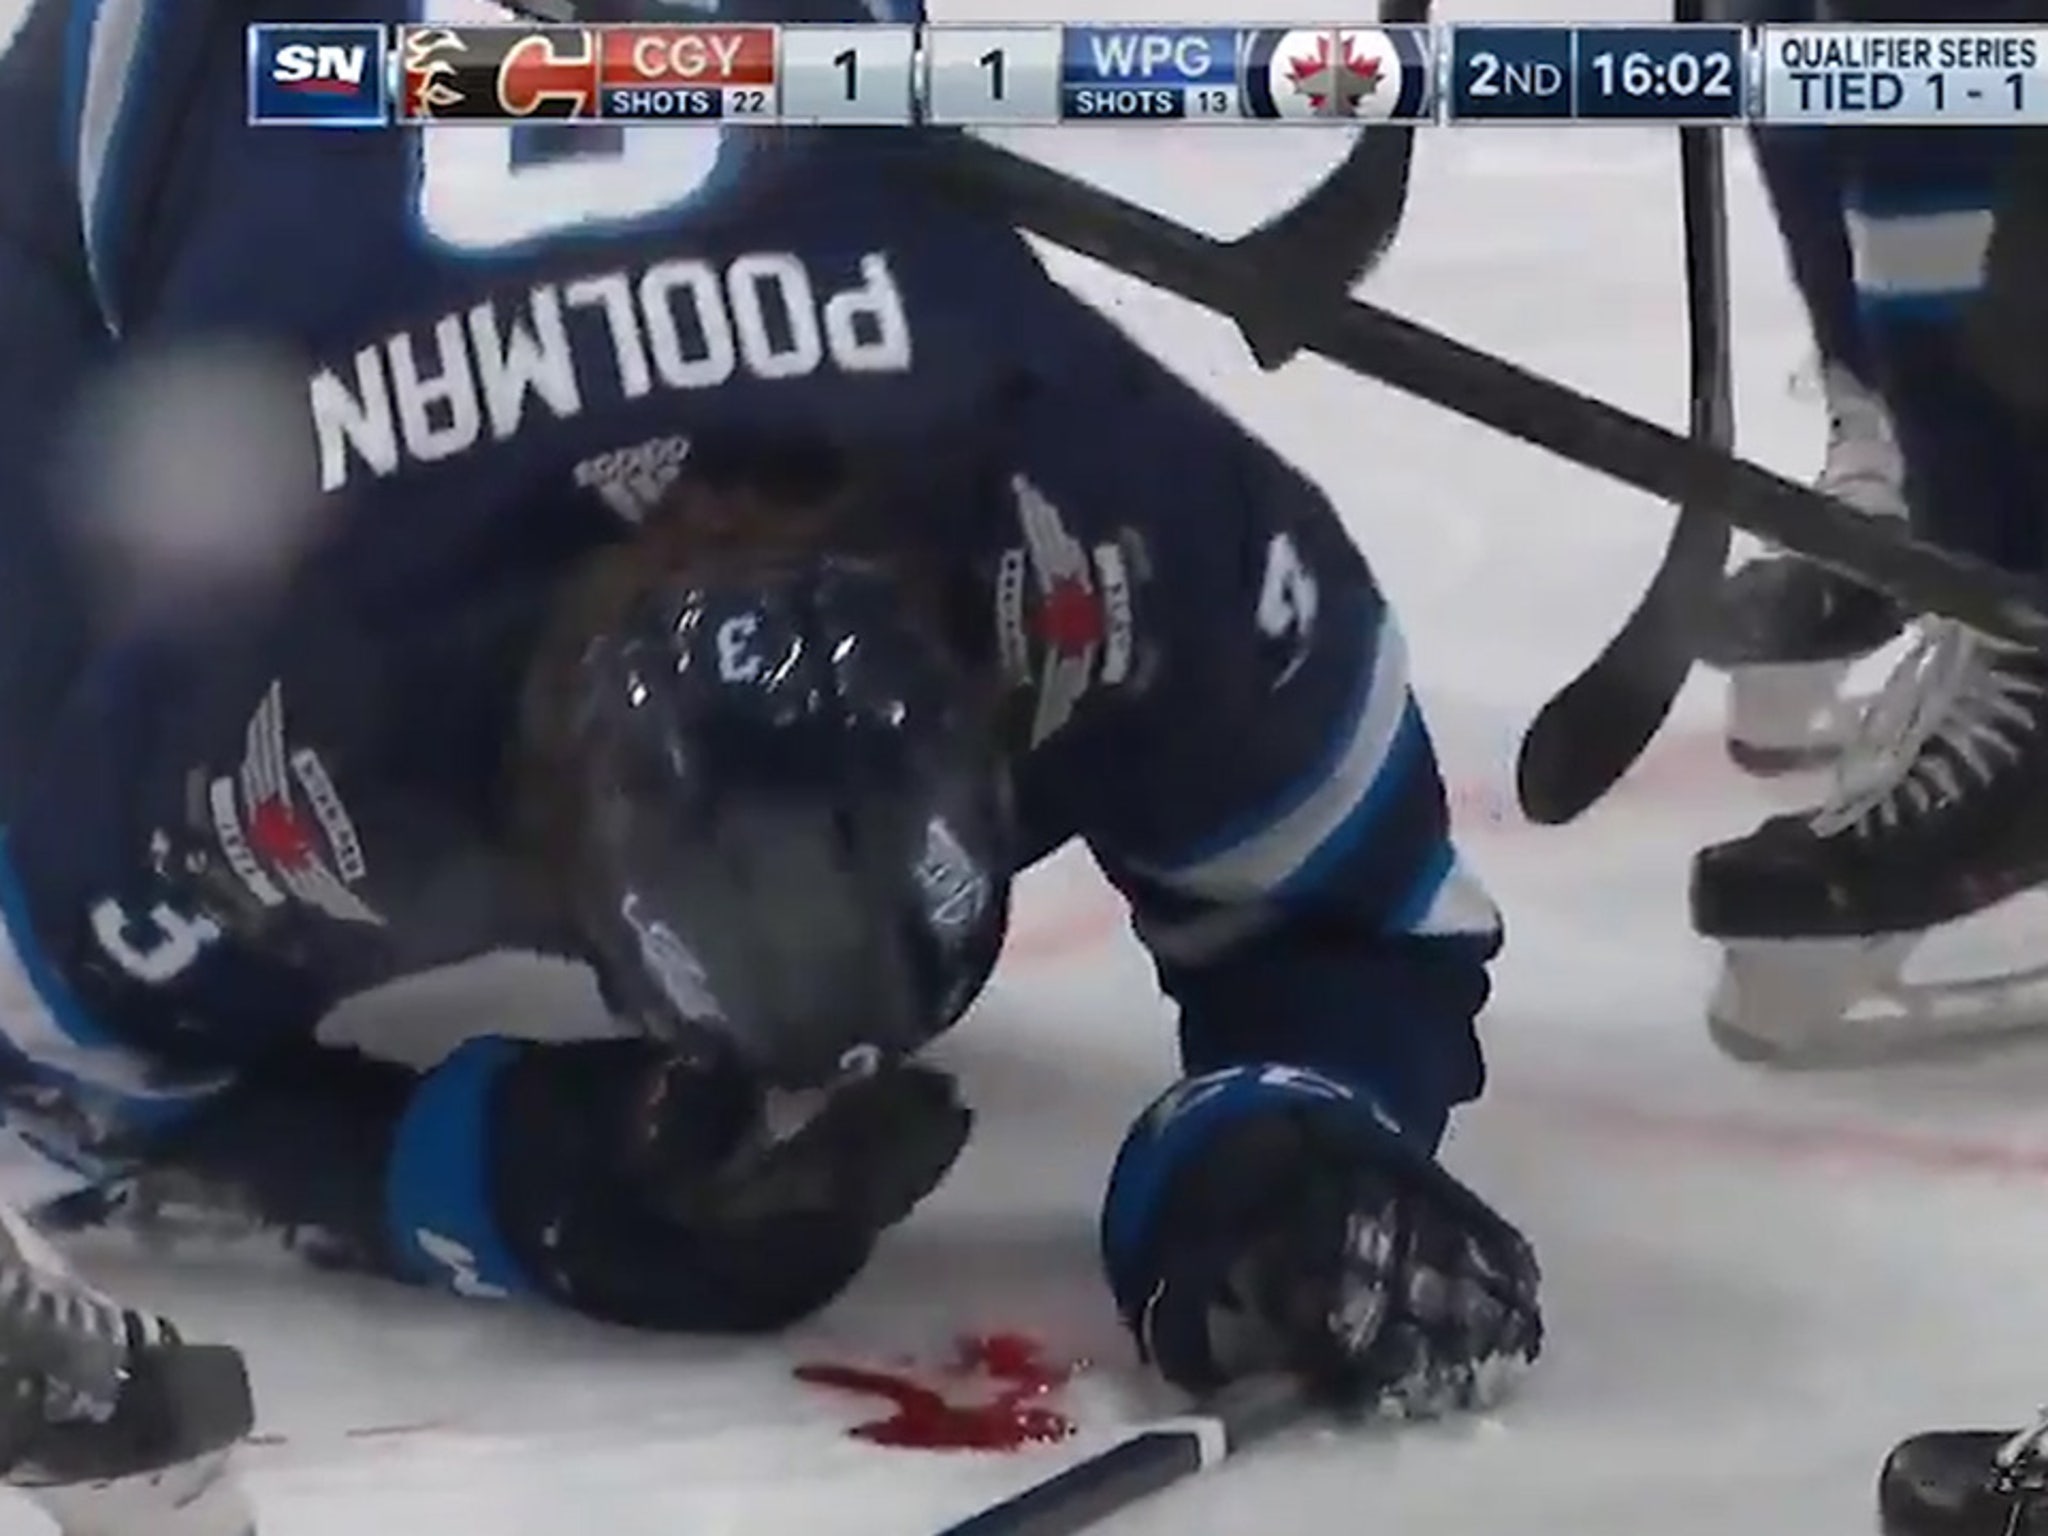 the blood game nhl